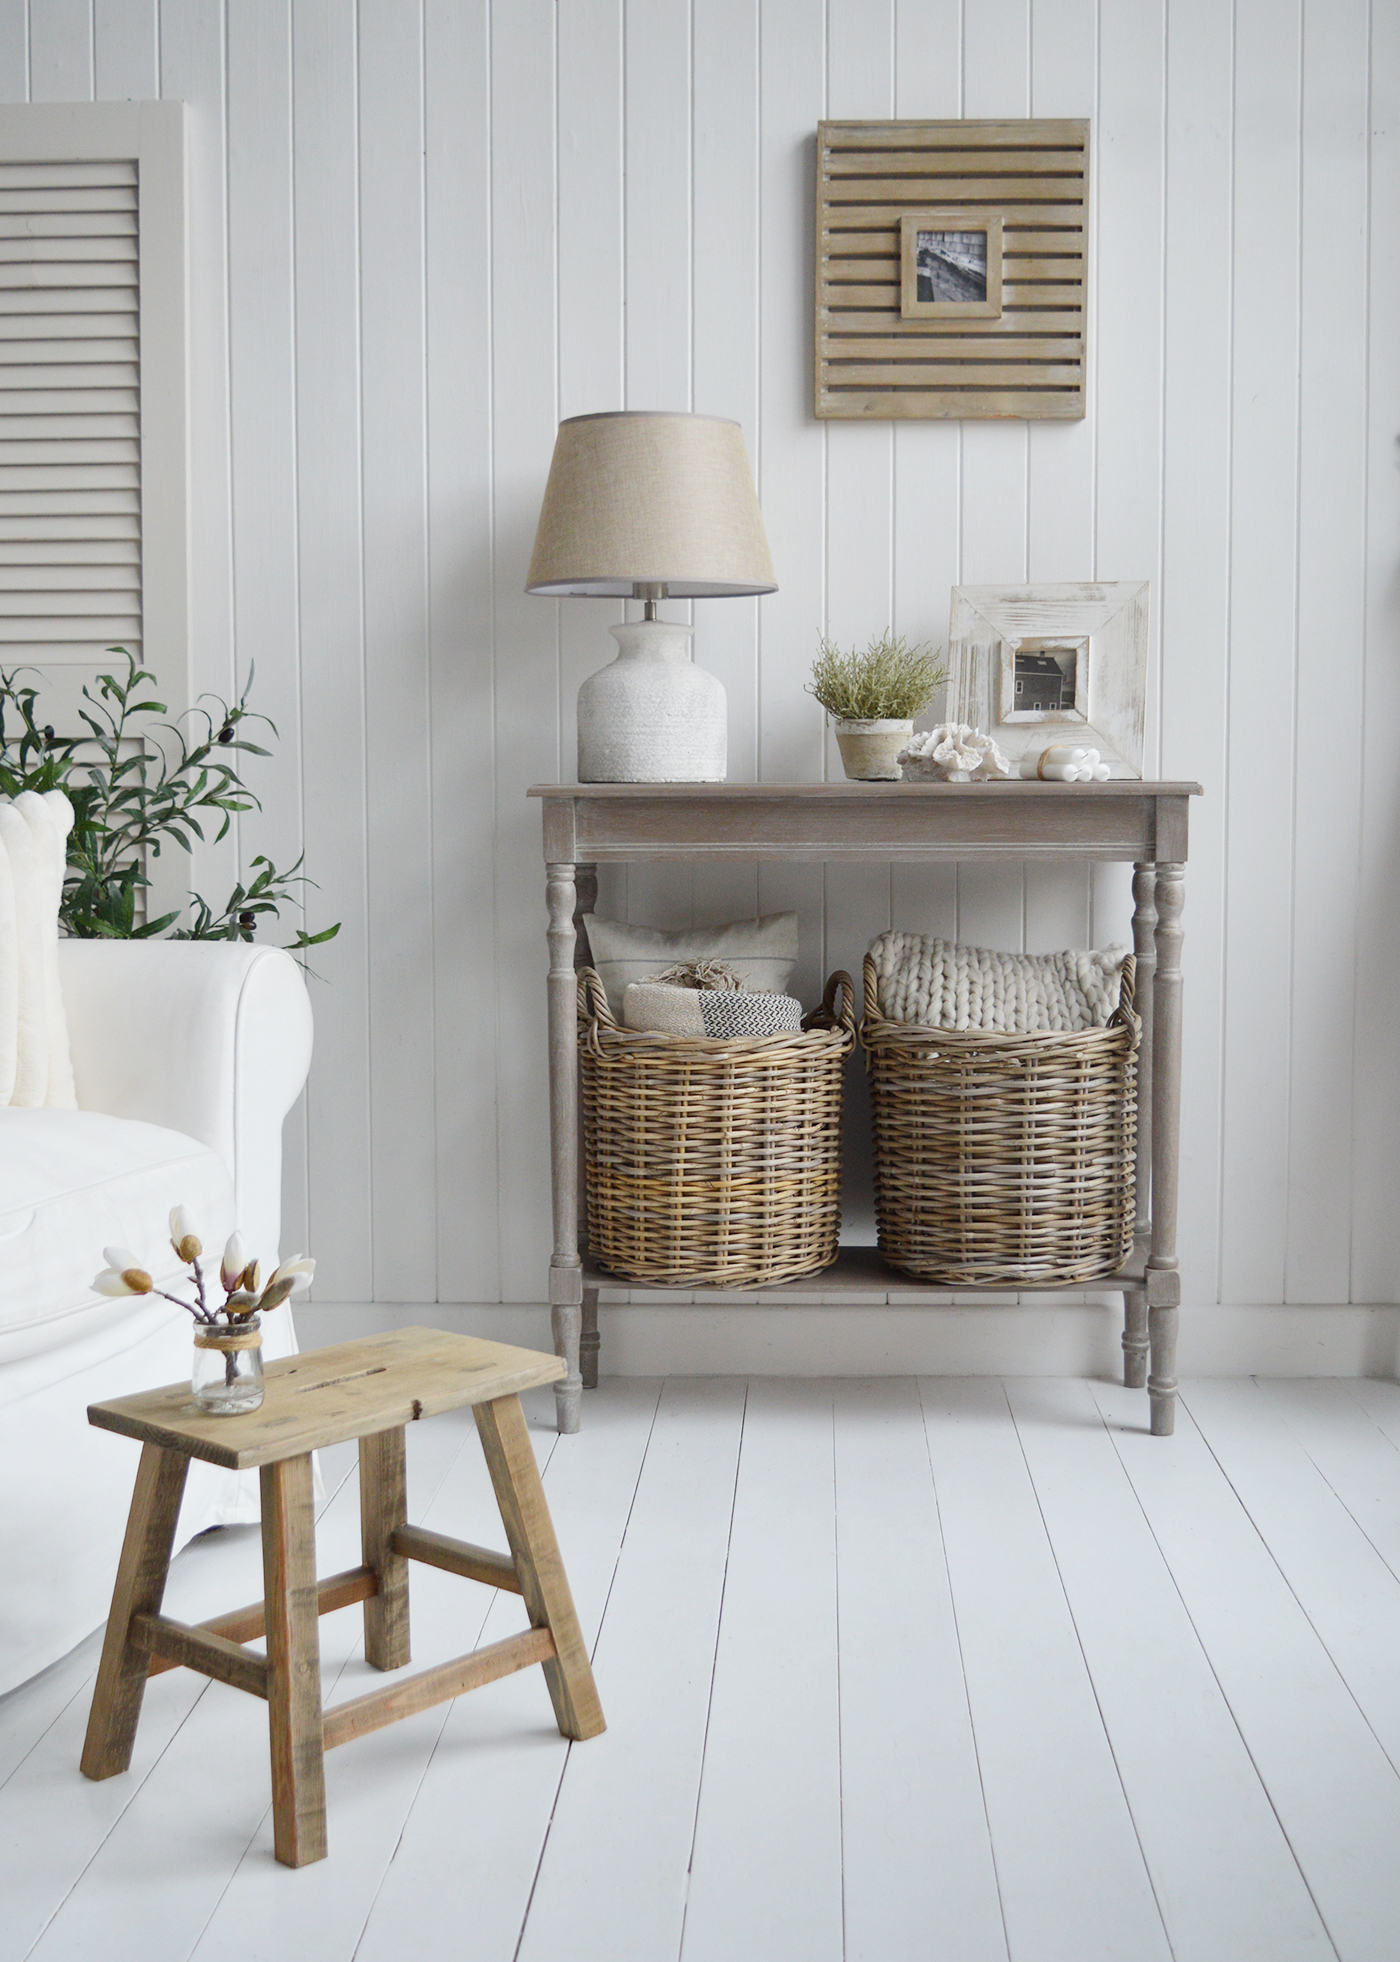 The Montauk console with 2 round baskets to add a warmth to a room